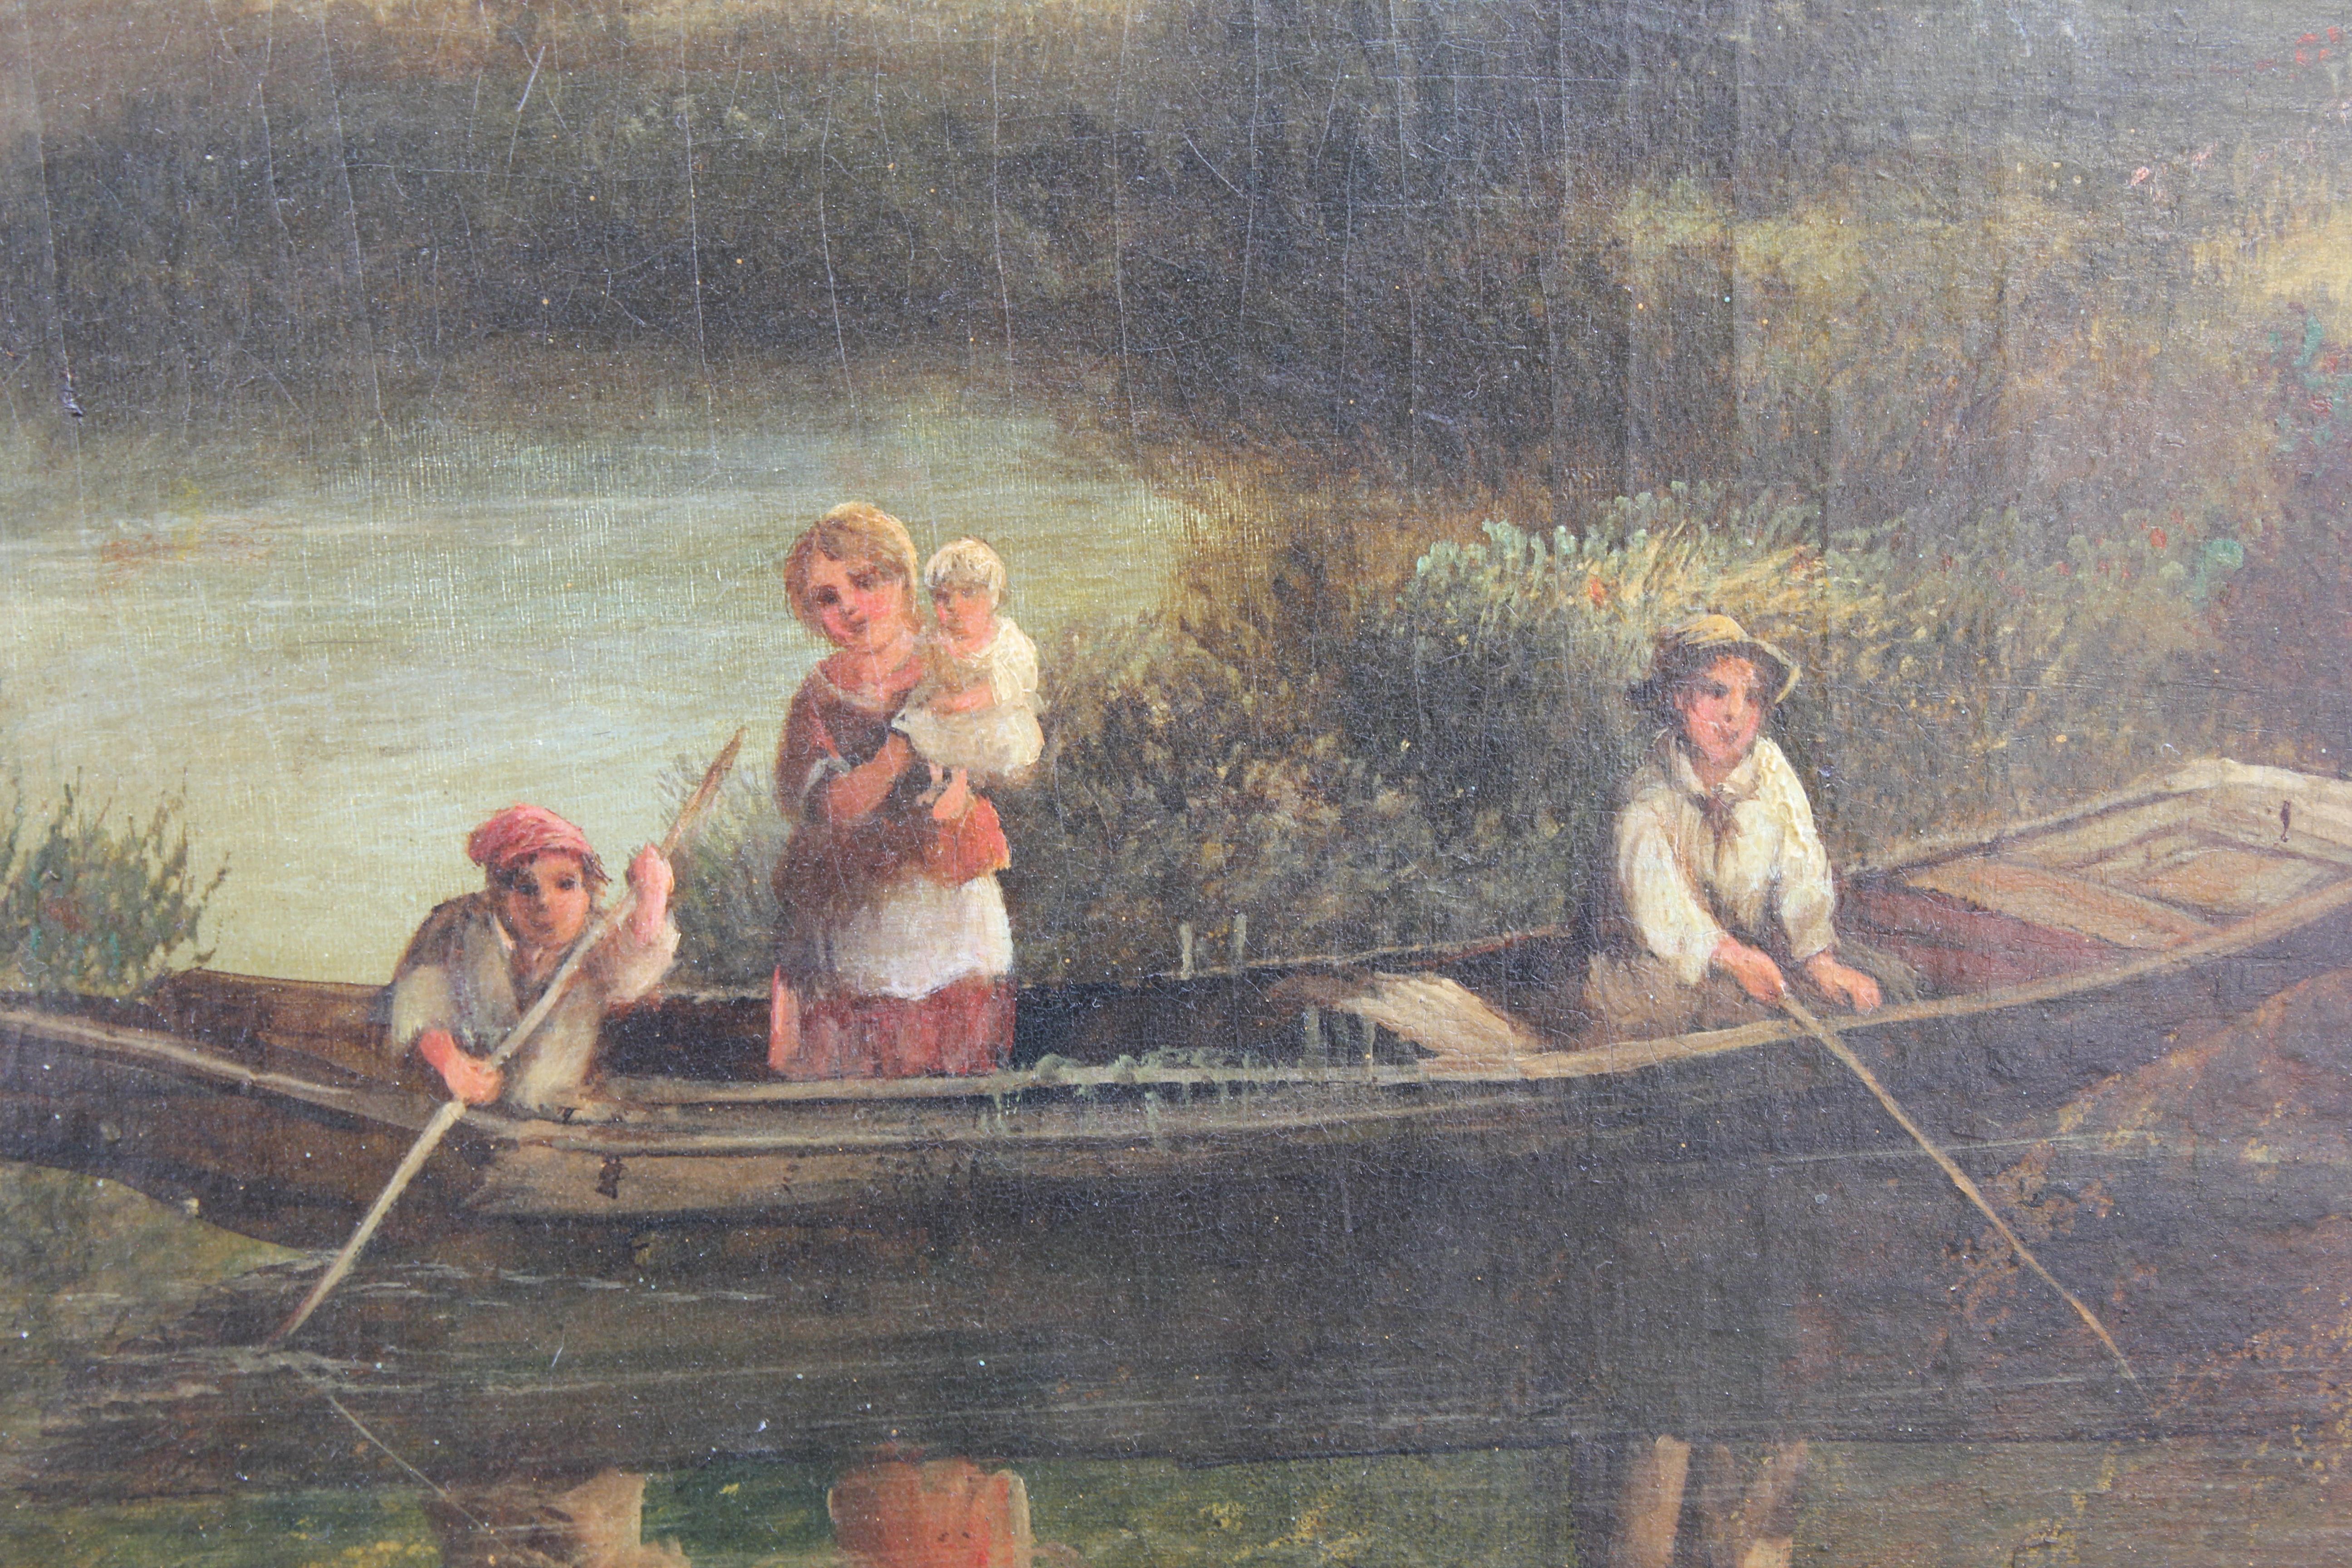 Naturalistic Landscape with Figures on a Boat - Painting by Unknown